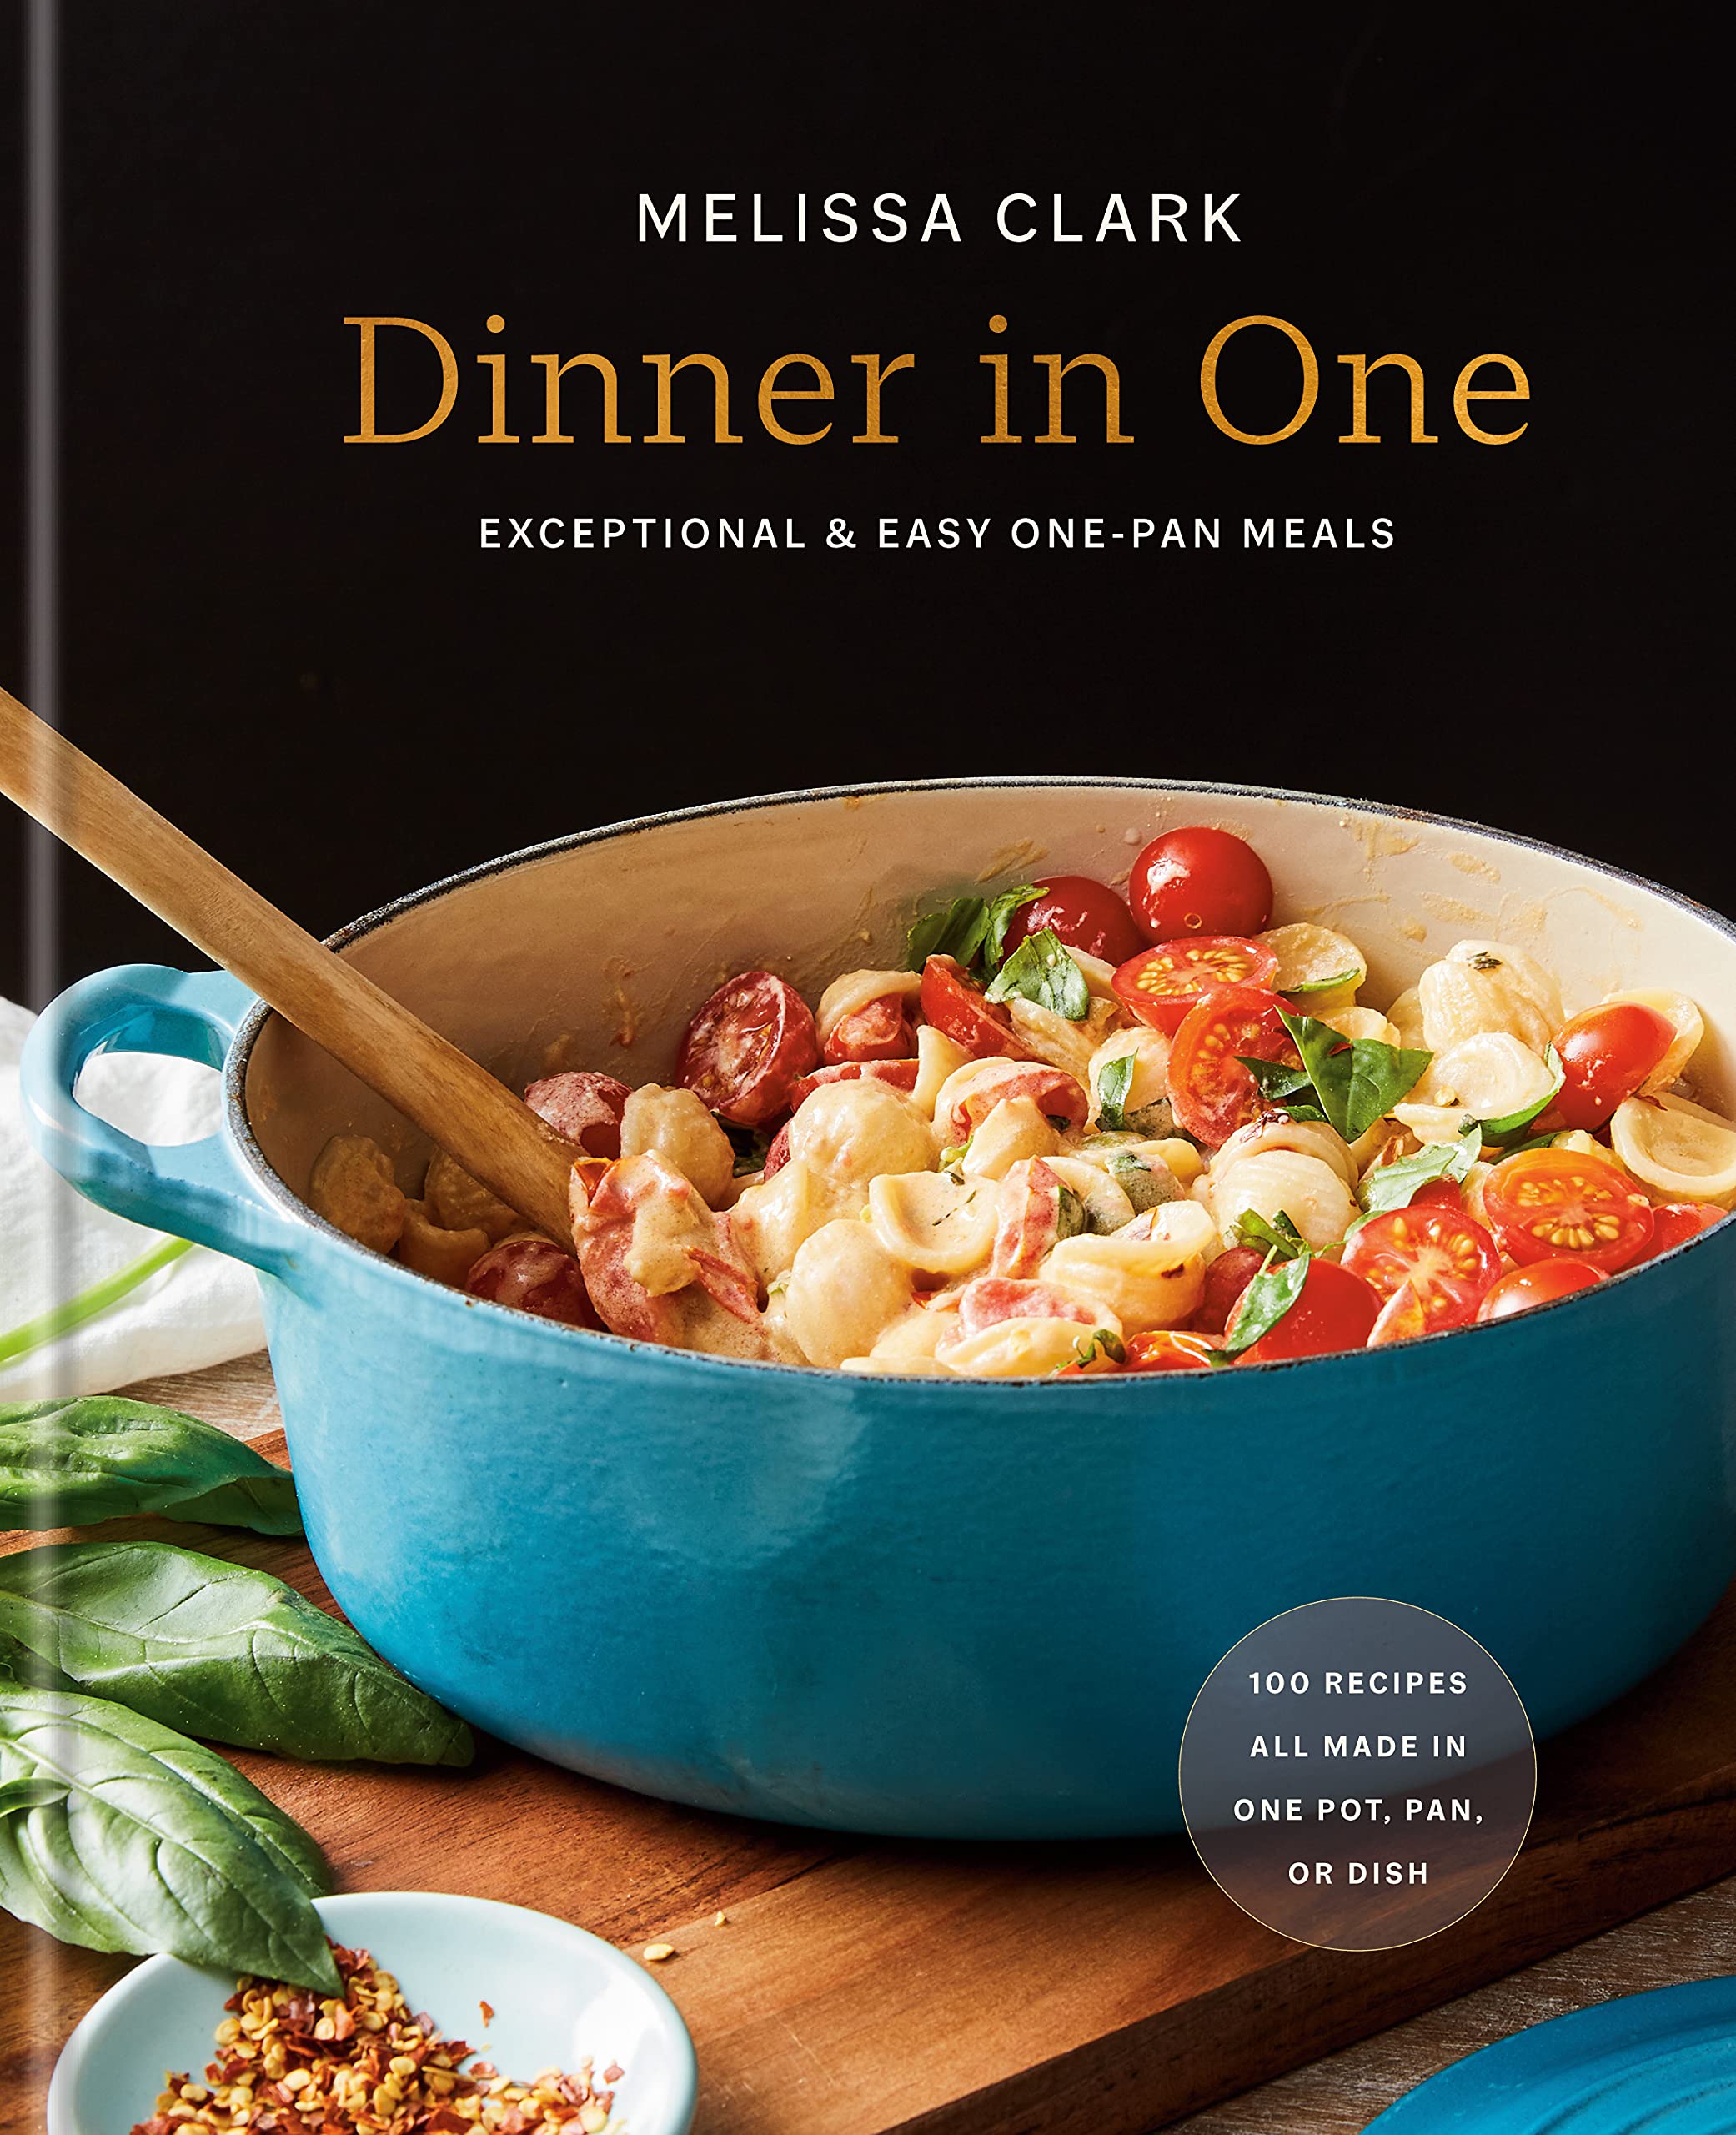 Dinner in One: Exceptional & Easy One-Pan Meals (Melissa Clark